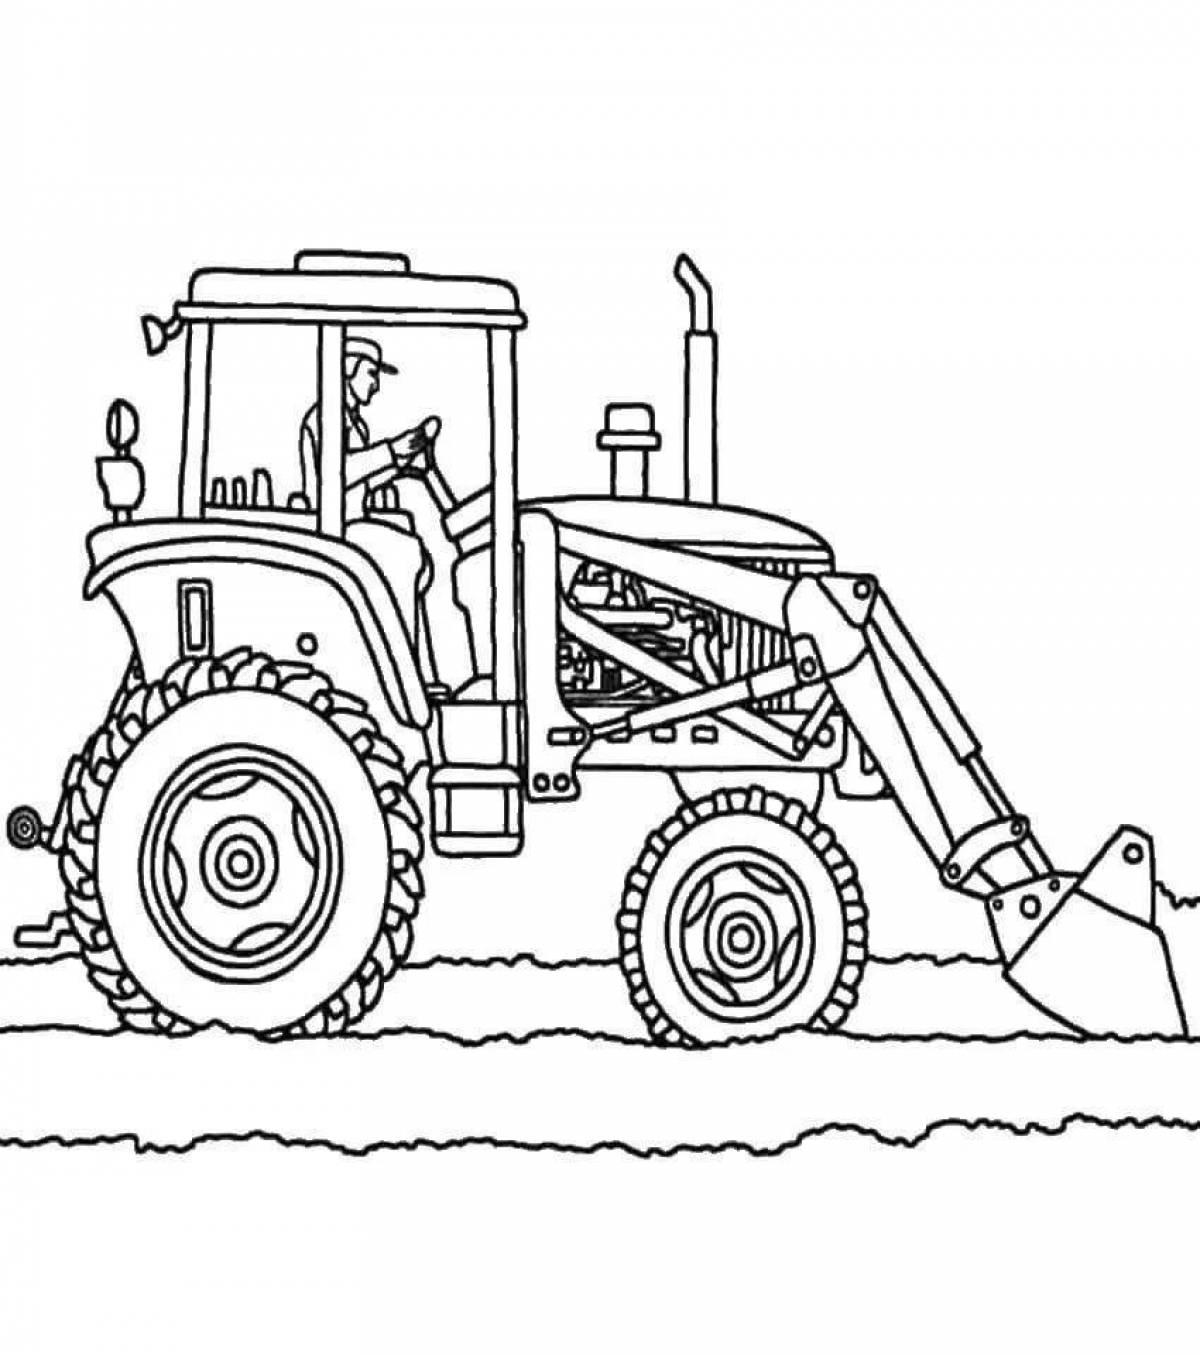 Bright tractor coloring page